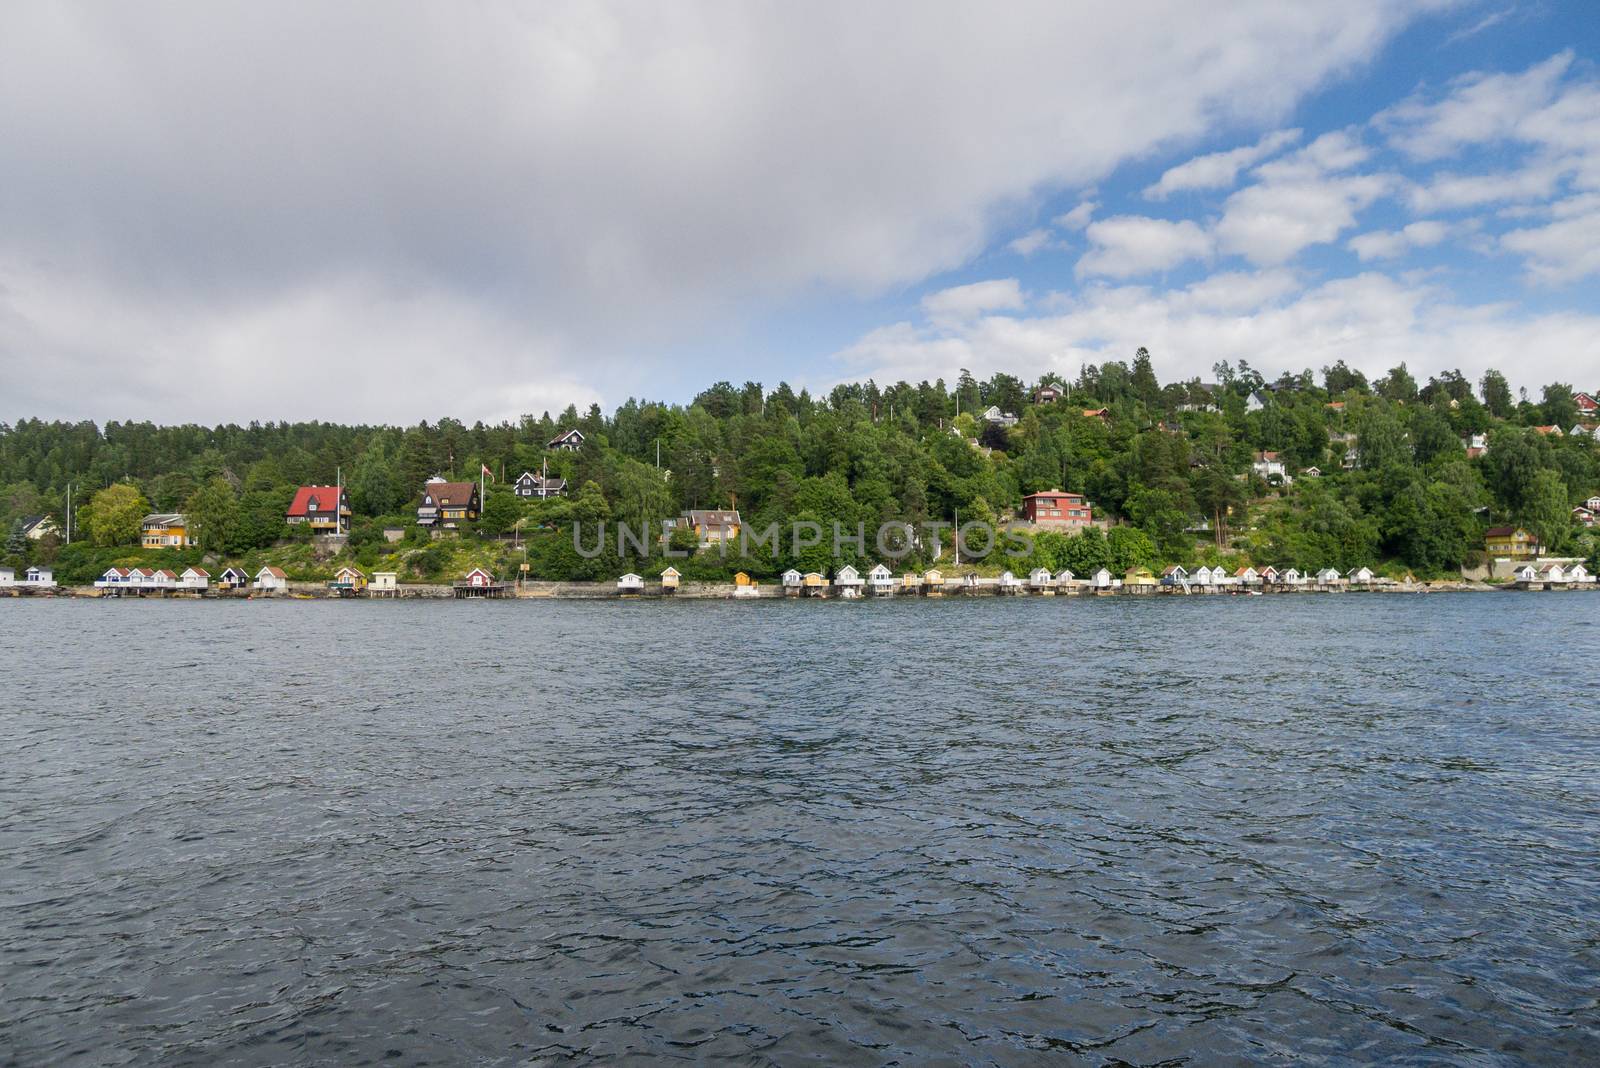 Oslo Coastline from the Oslo Fjord by chrisukphoto